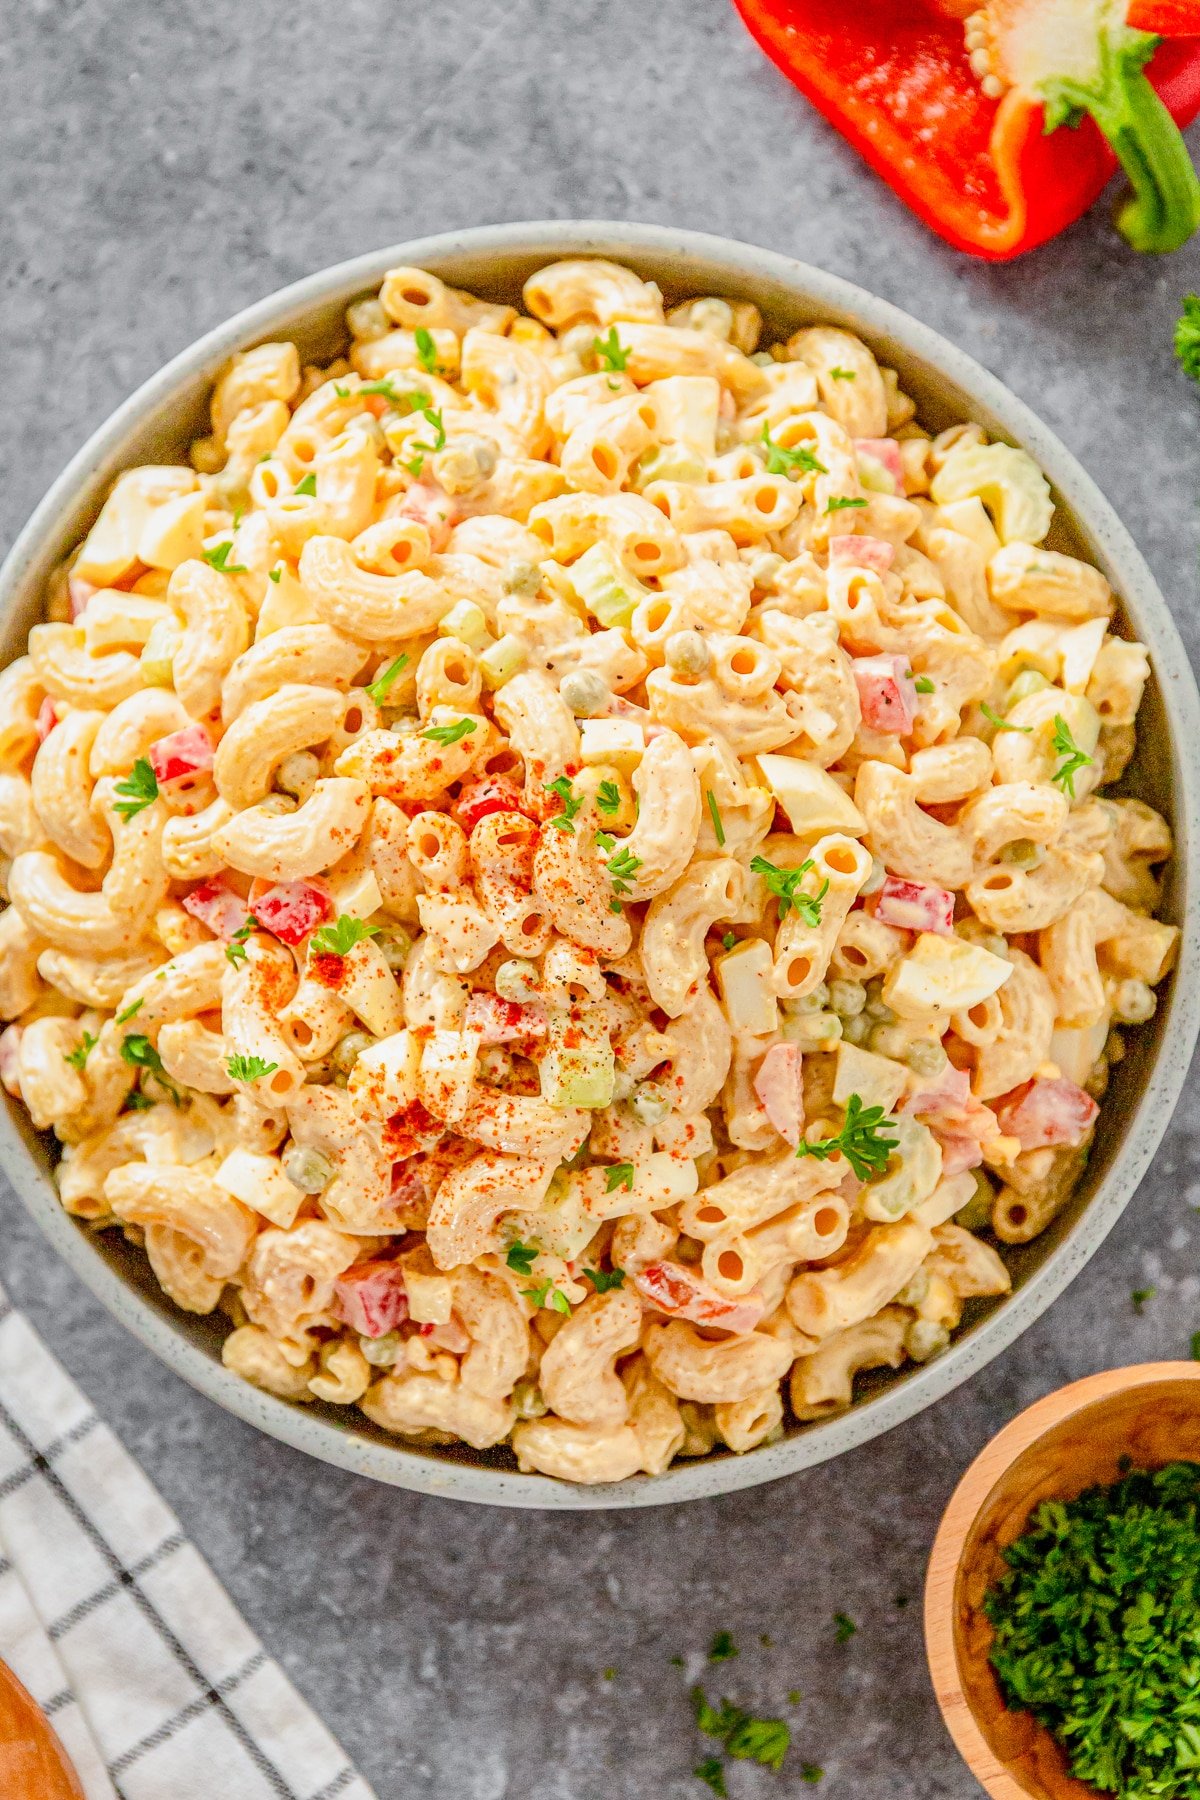 Overhead image of macaroni salad with peas in a grey bowl